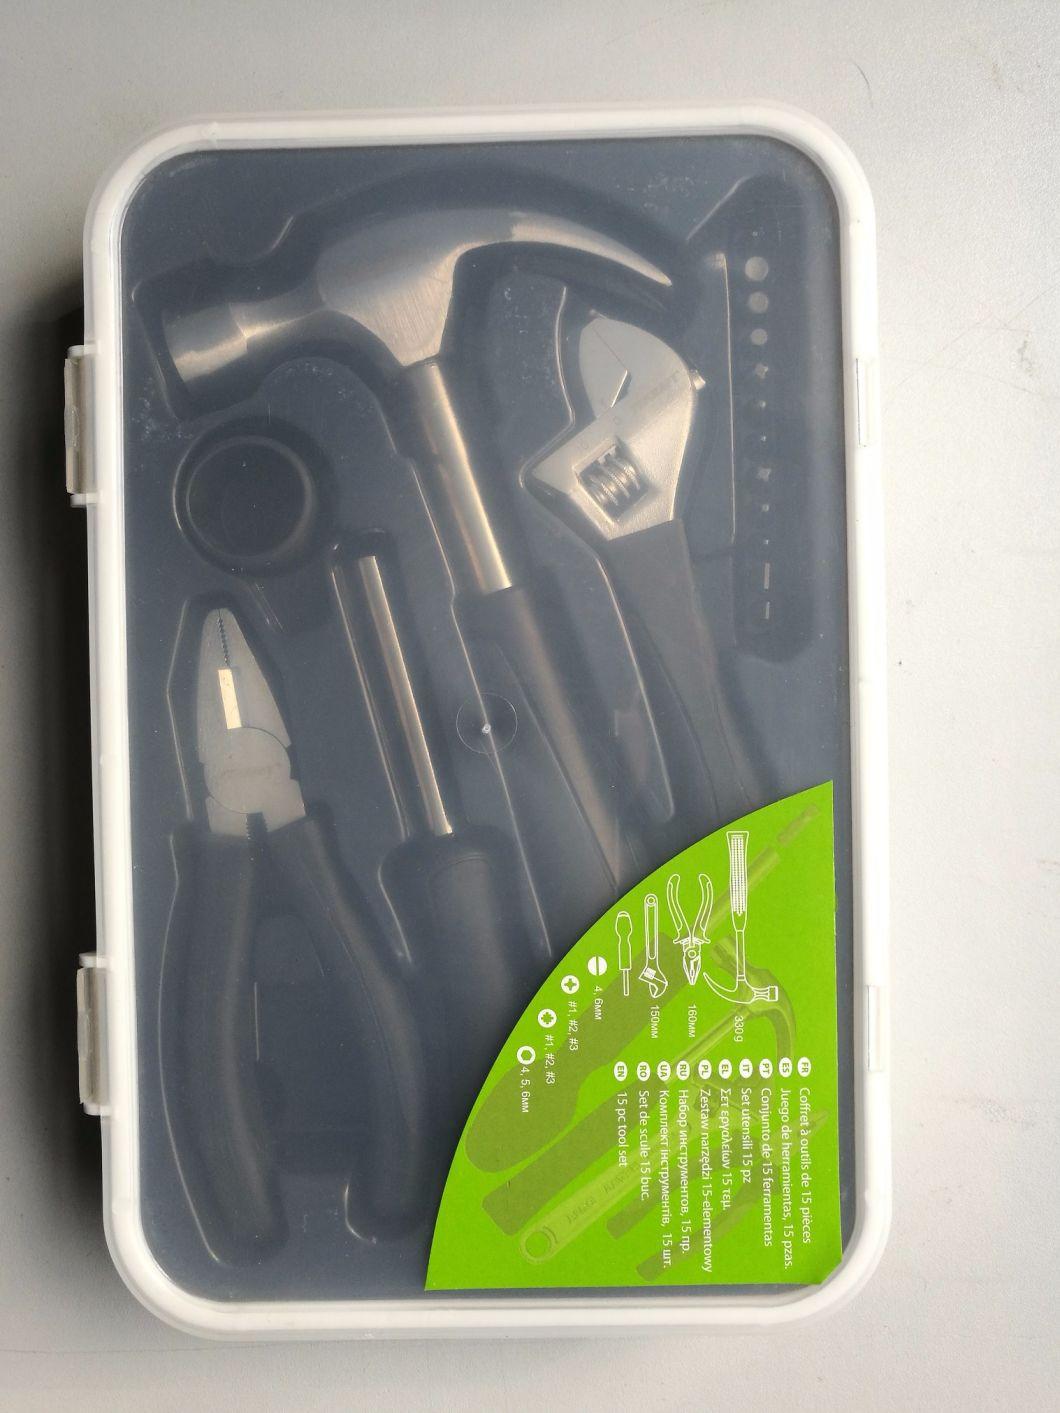 15PCS Promotional Tool Set in Case (FY1015B1)